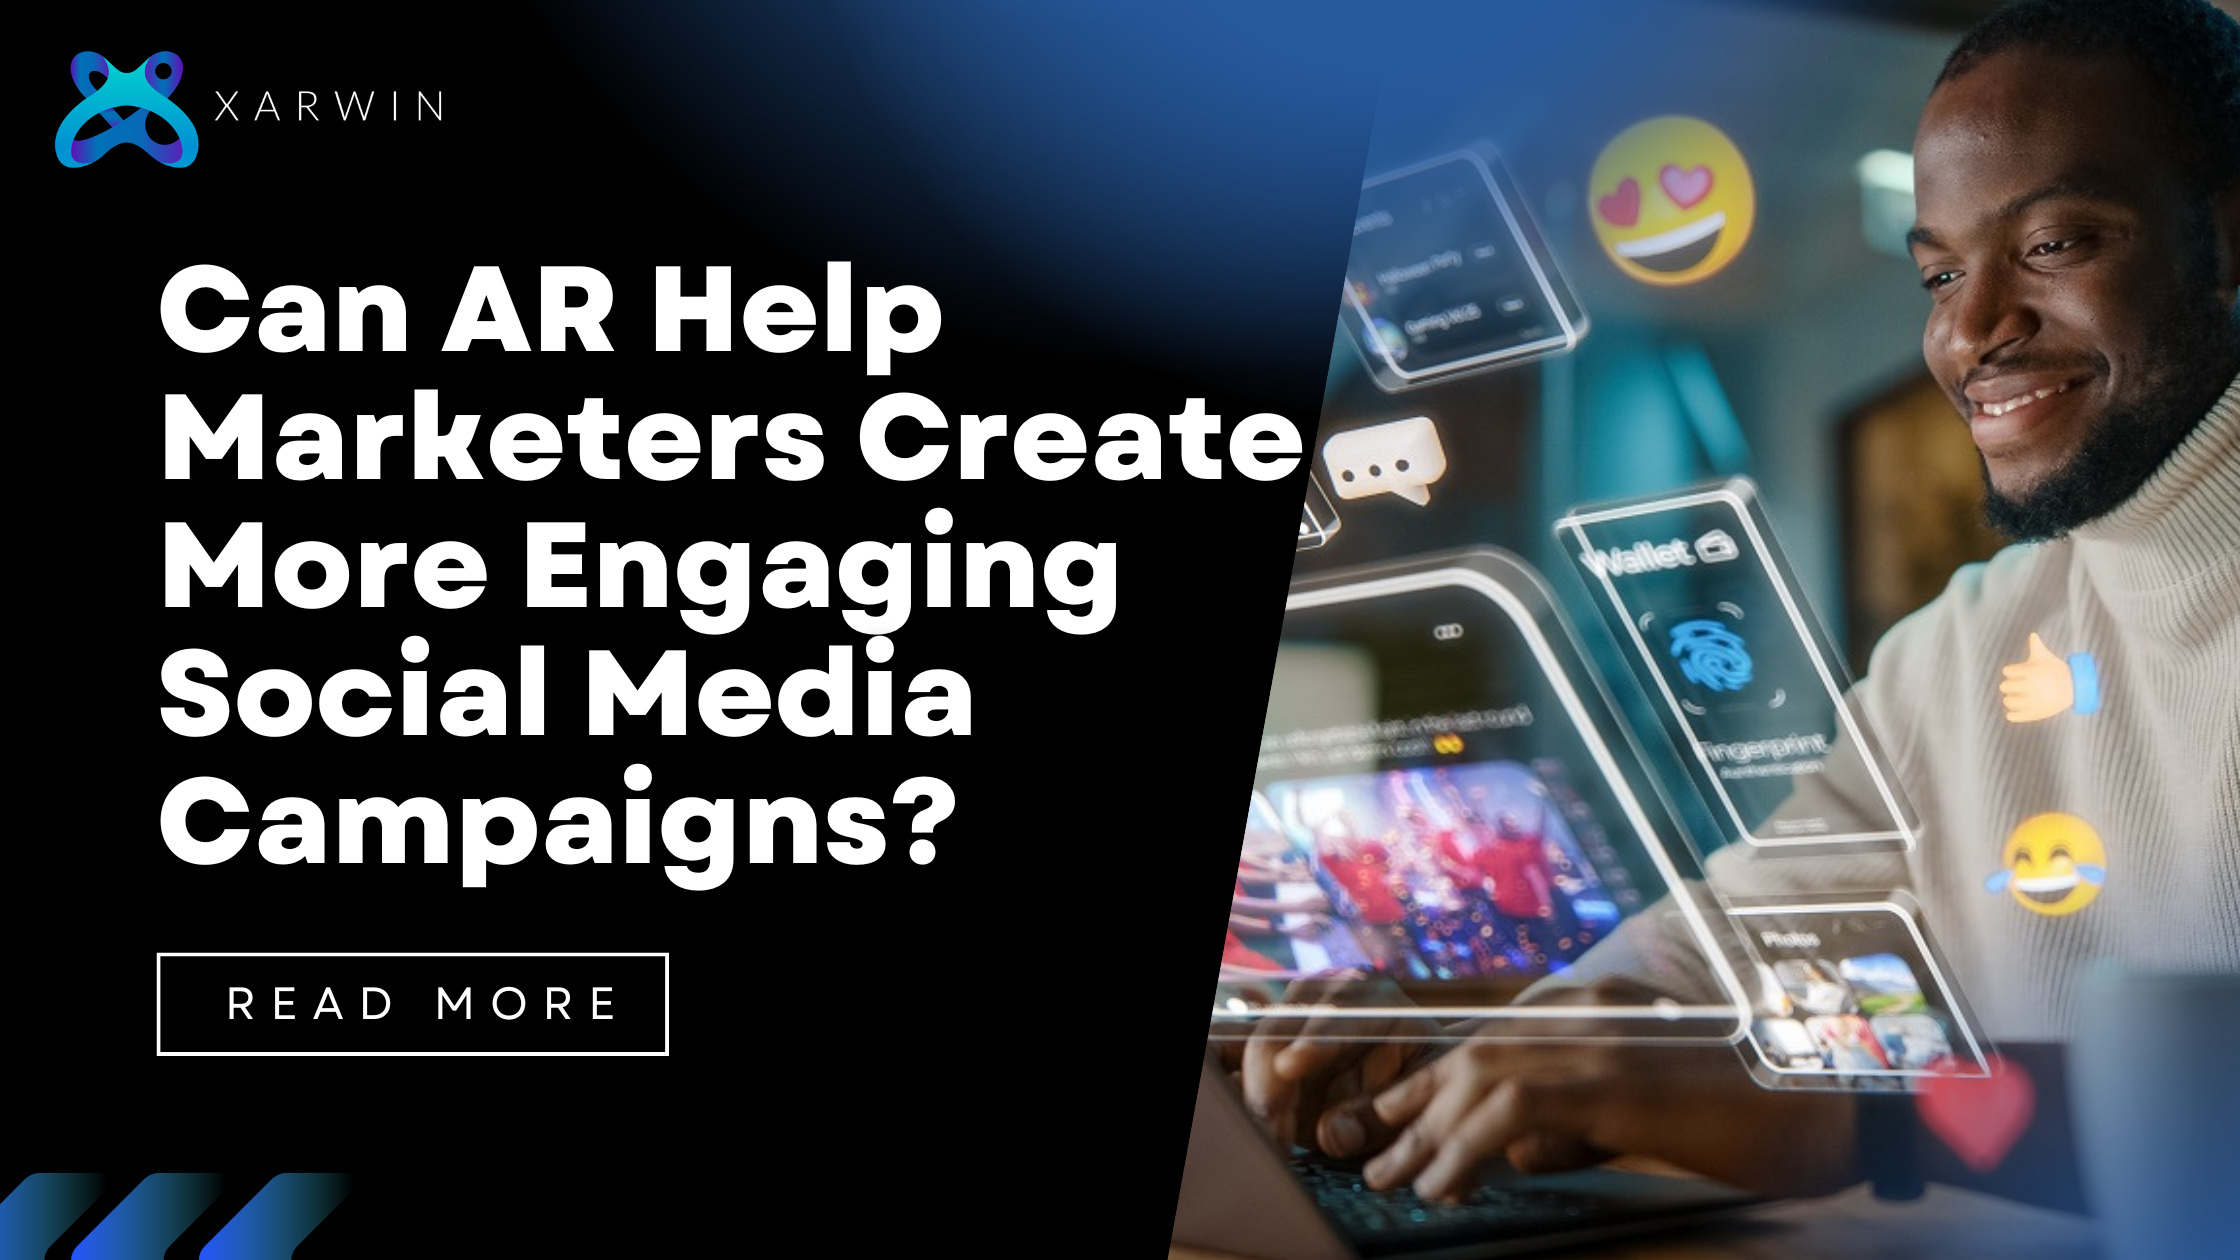 Can AR Help Marketers Create More Engaging Social Media Campaigns